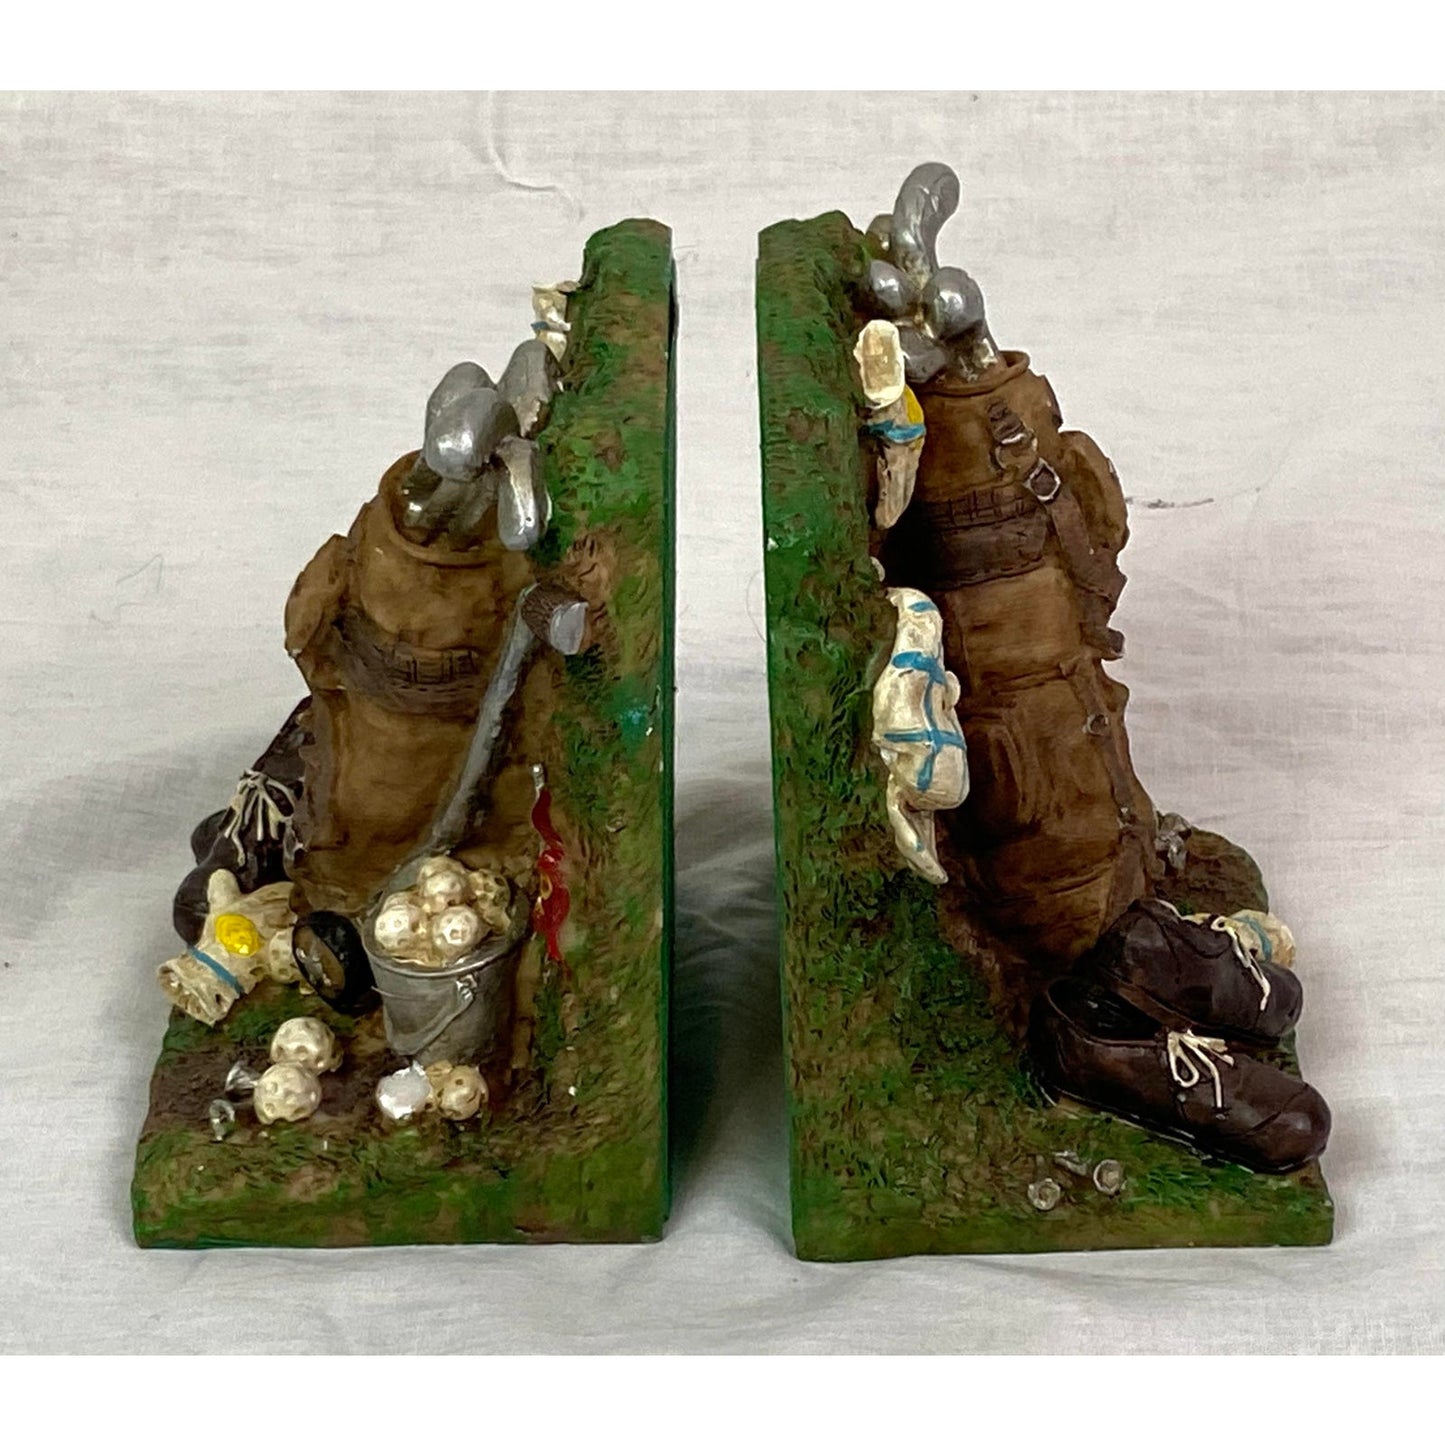 [SOLD] Green Golf Bookends - Pair of 2